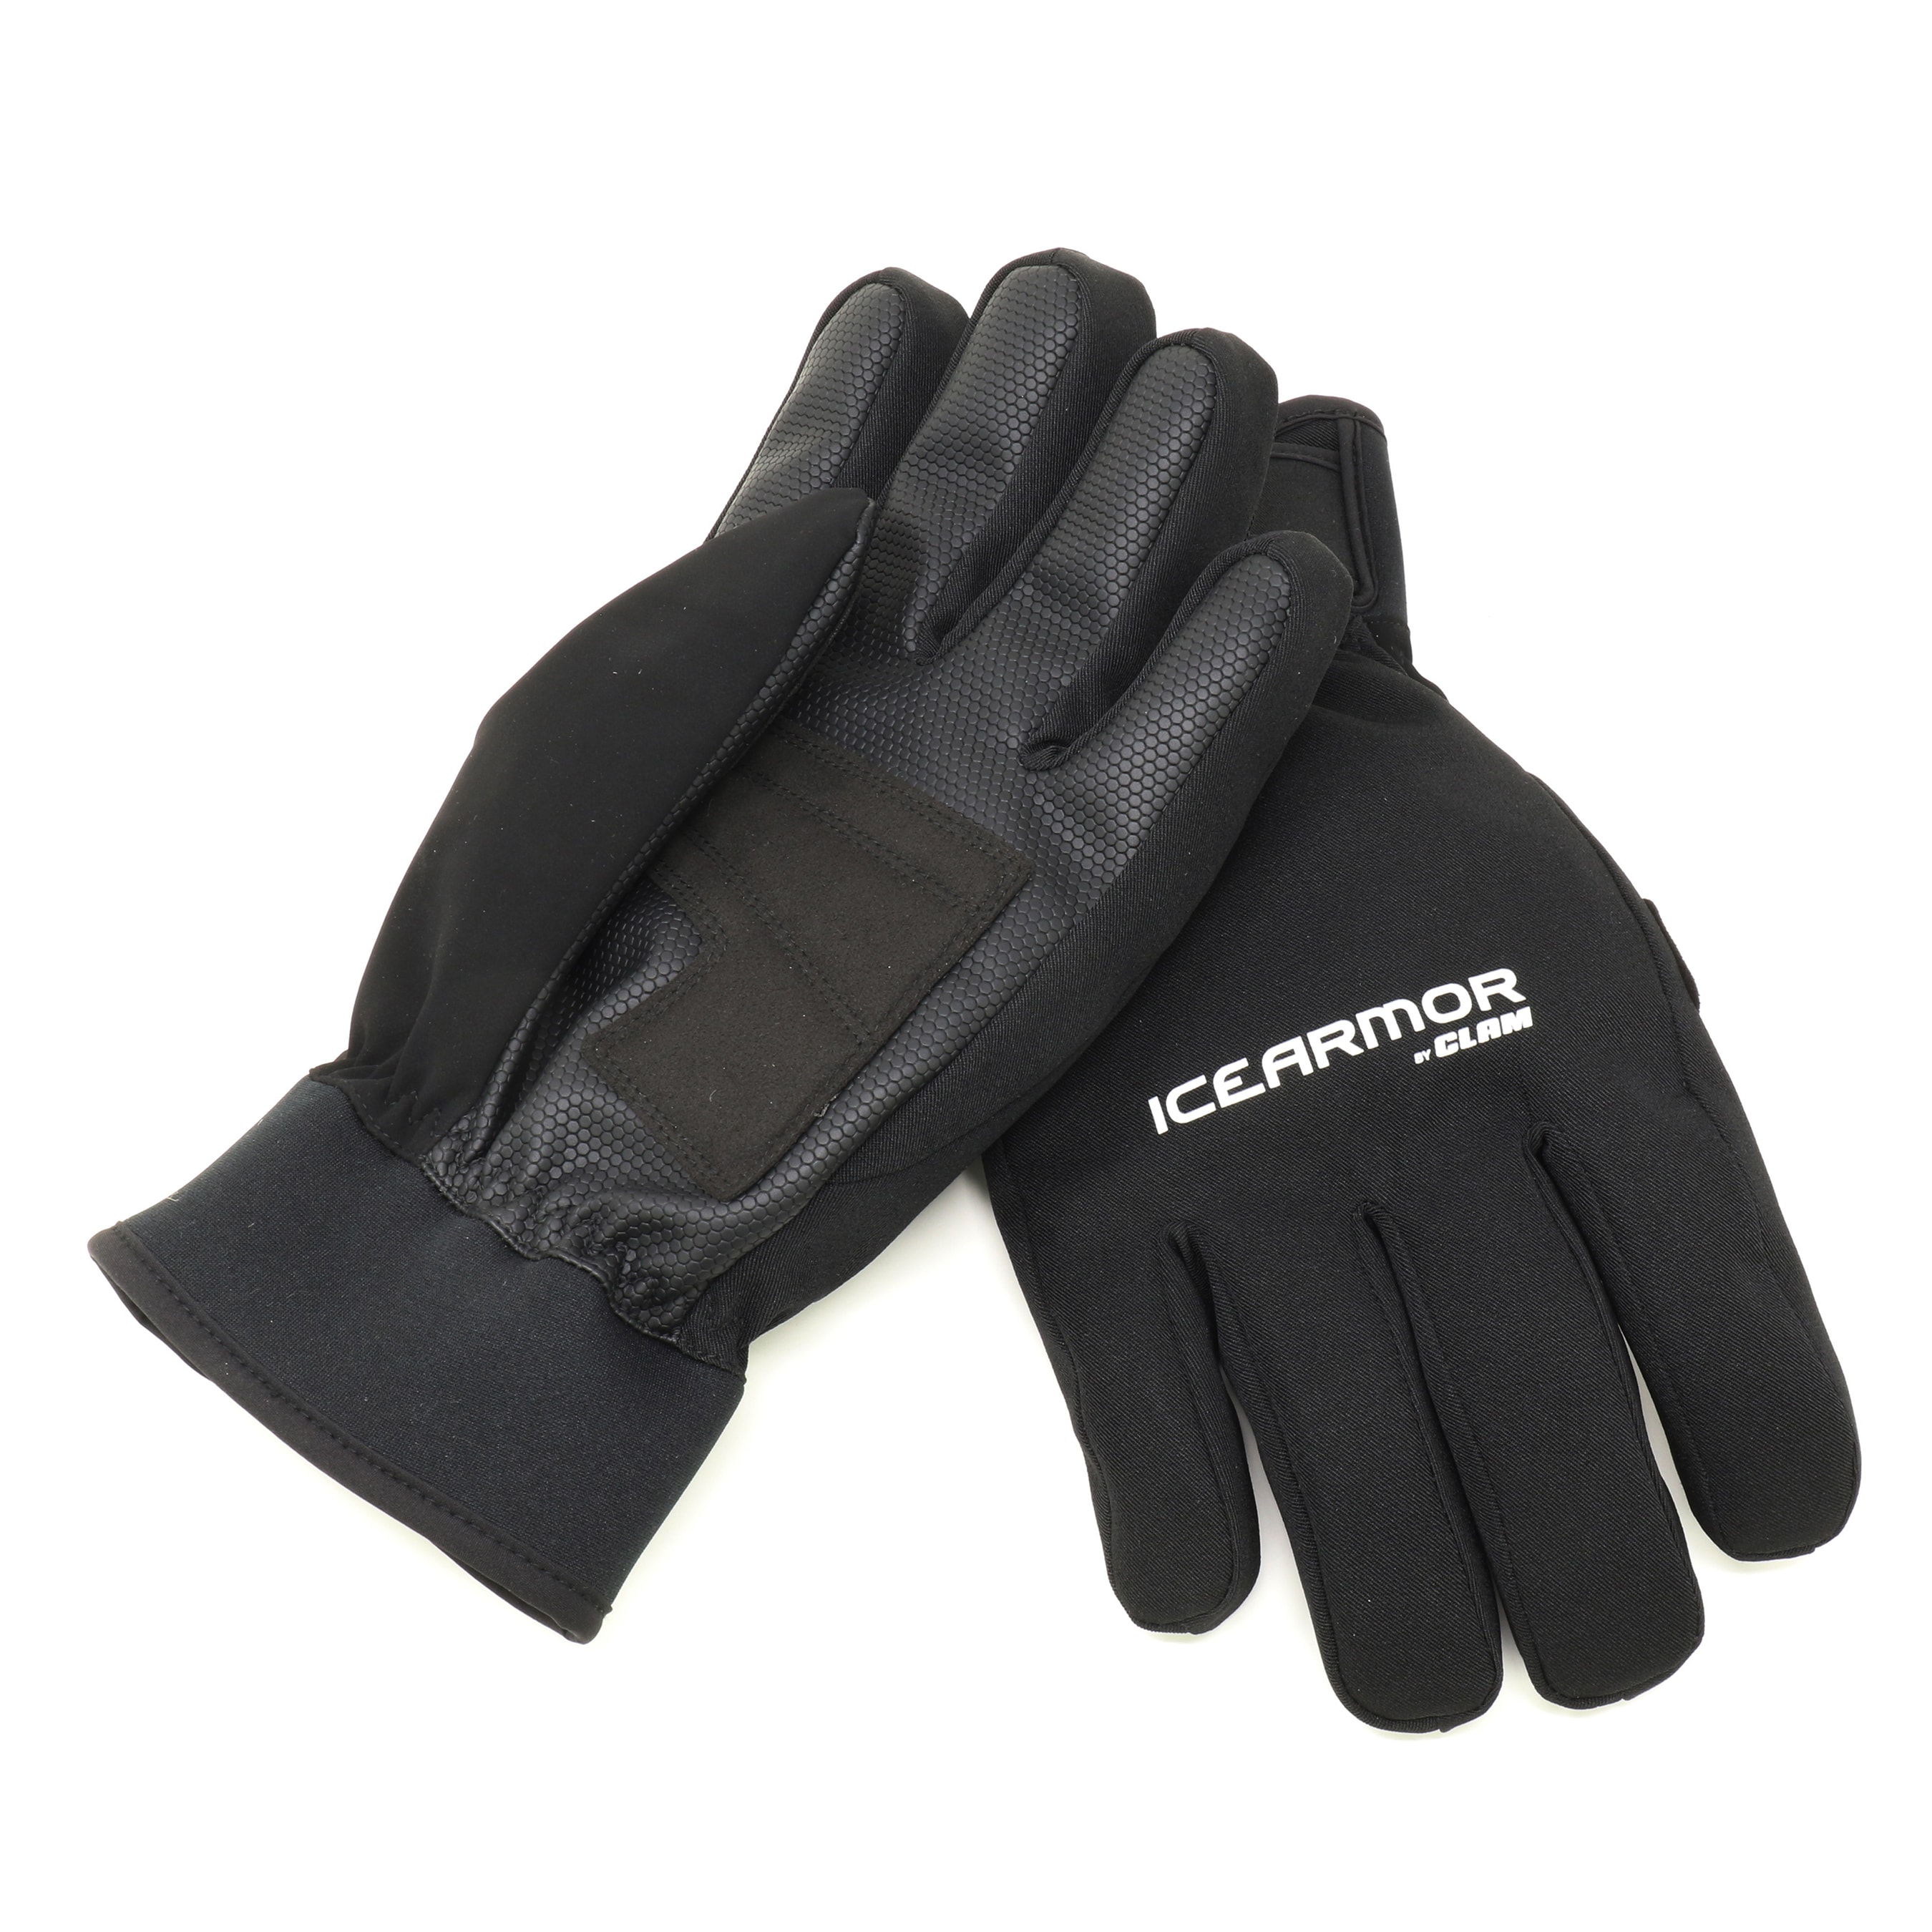 Clam Outdoors Delta Men's Ice Fishing Gloves, Black, Adult L/XL, 3